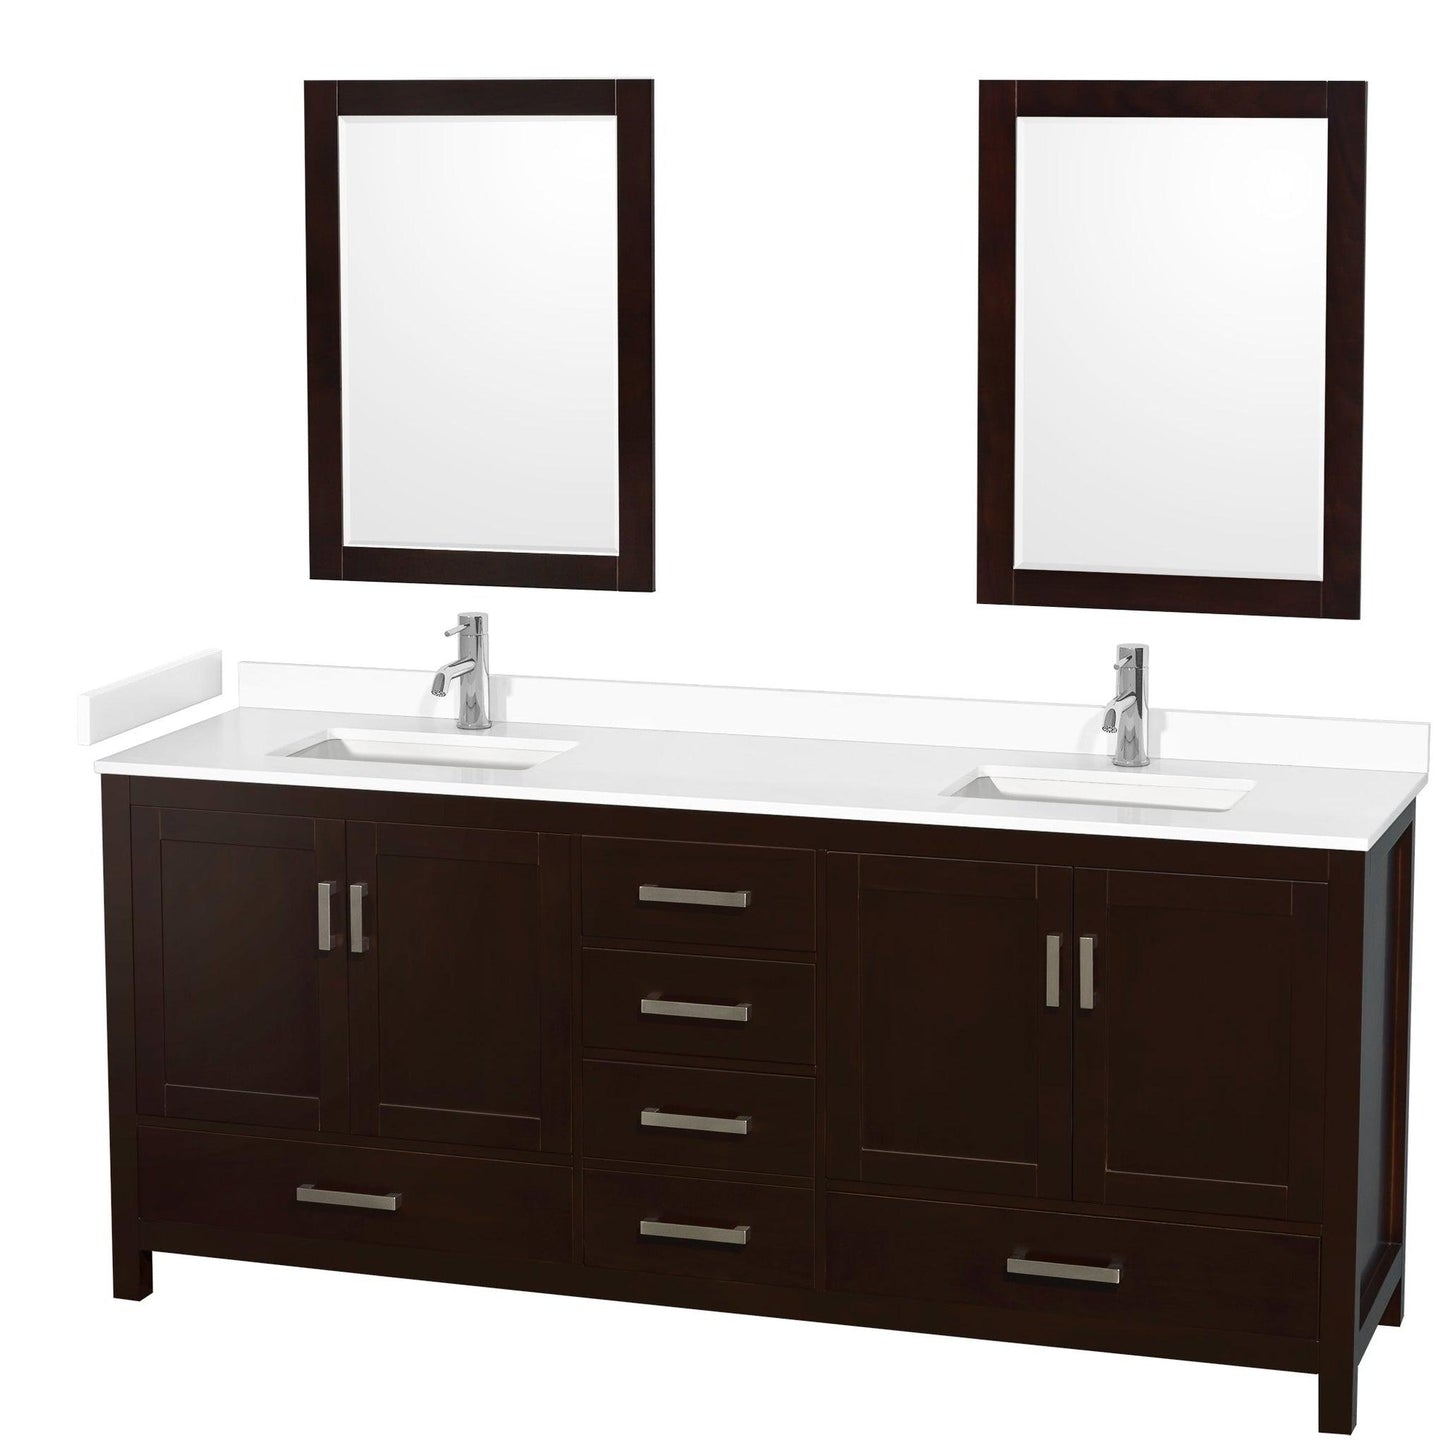 Wyndham Collection Sheffield 80" Double Bathroom Vanity in Espresso, White Cultured Marble Countertop, Undermount Square Sinks, 24" Mirror